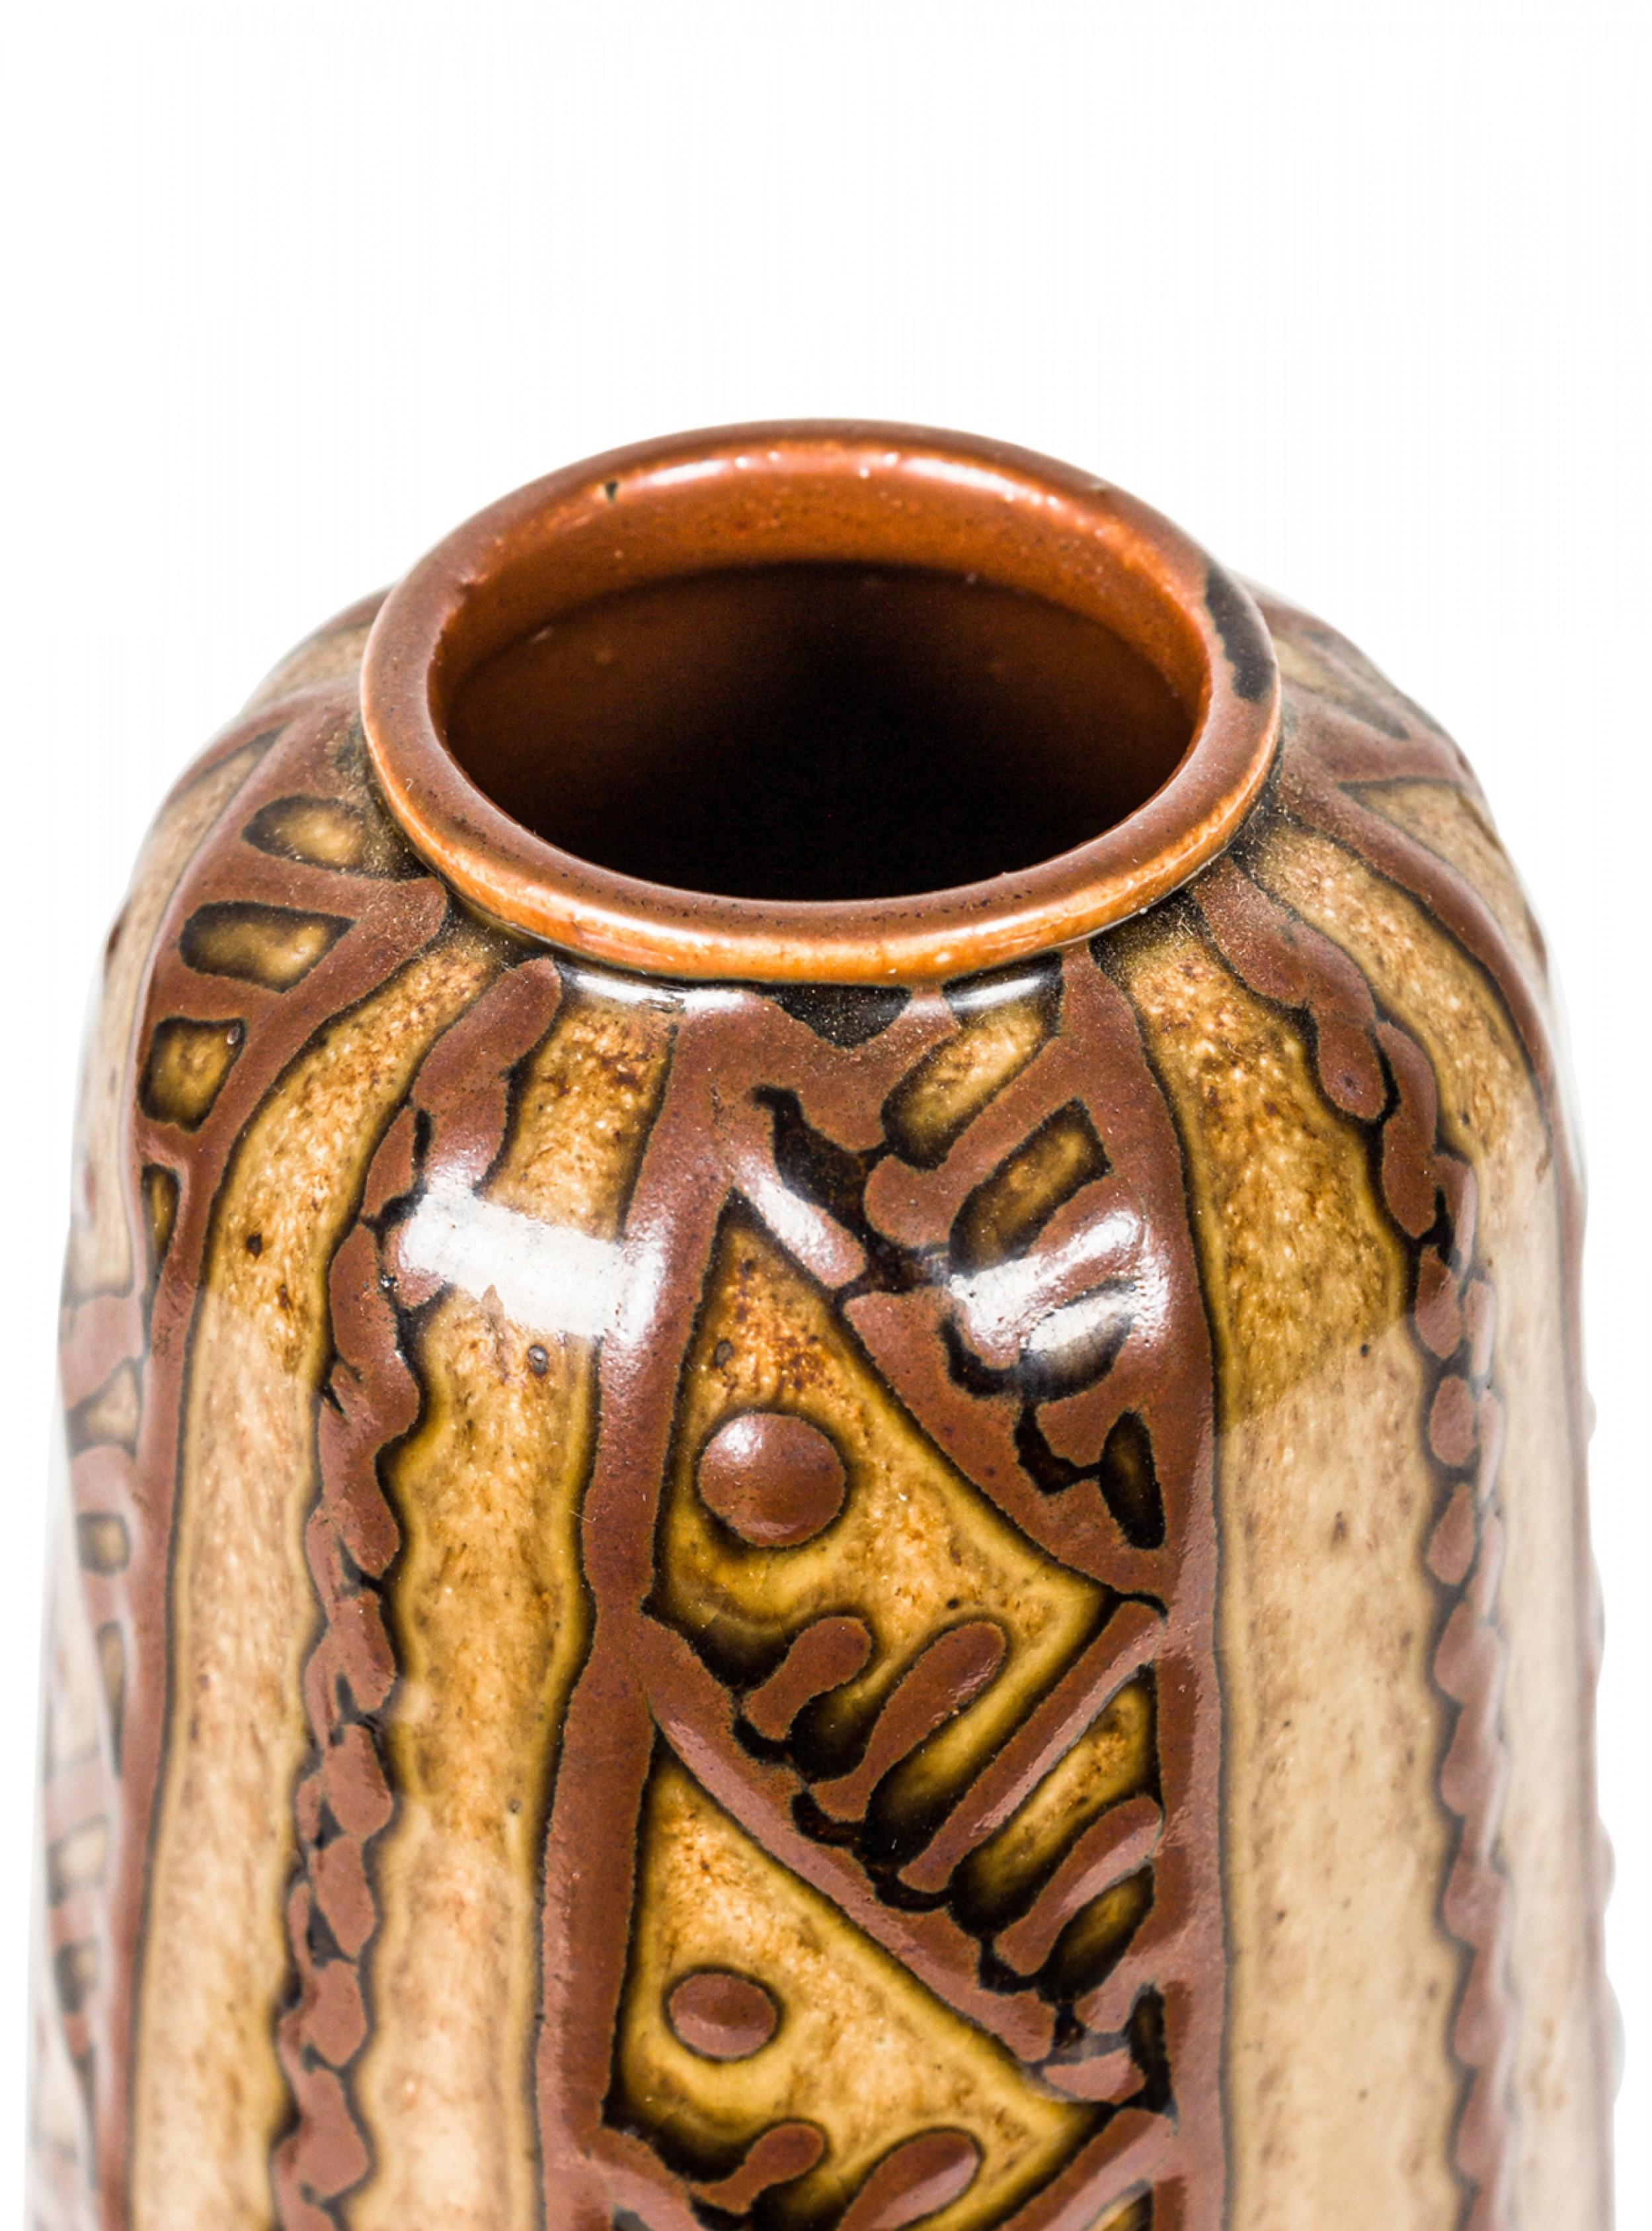 German mid-century tapered cylindrical ceramic vase with a raised brown diagonal and vertical line and dot pattern against a gold and brown glazed ground. (mark on bottom).